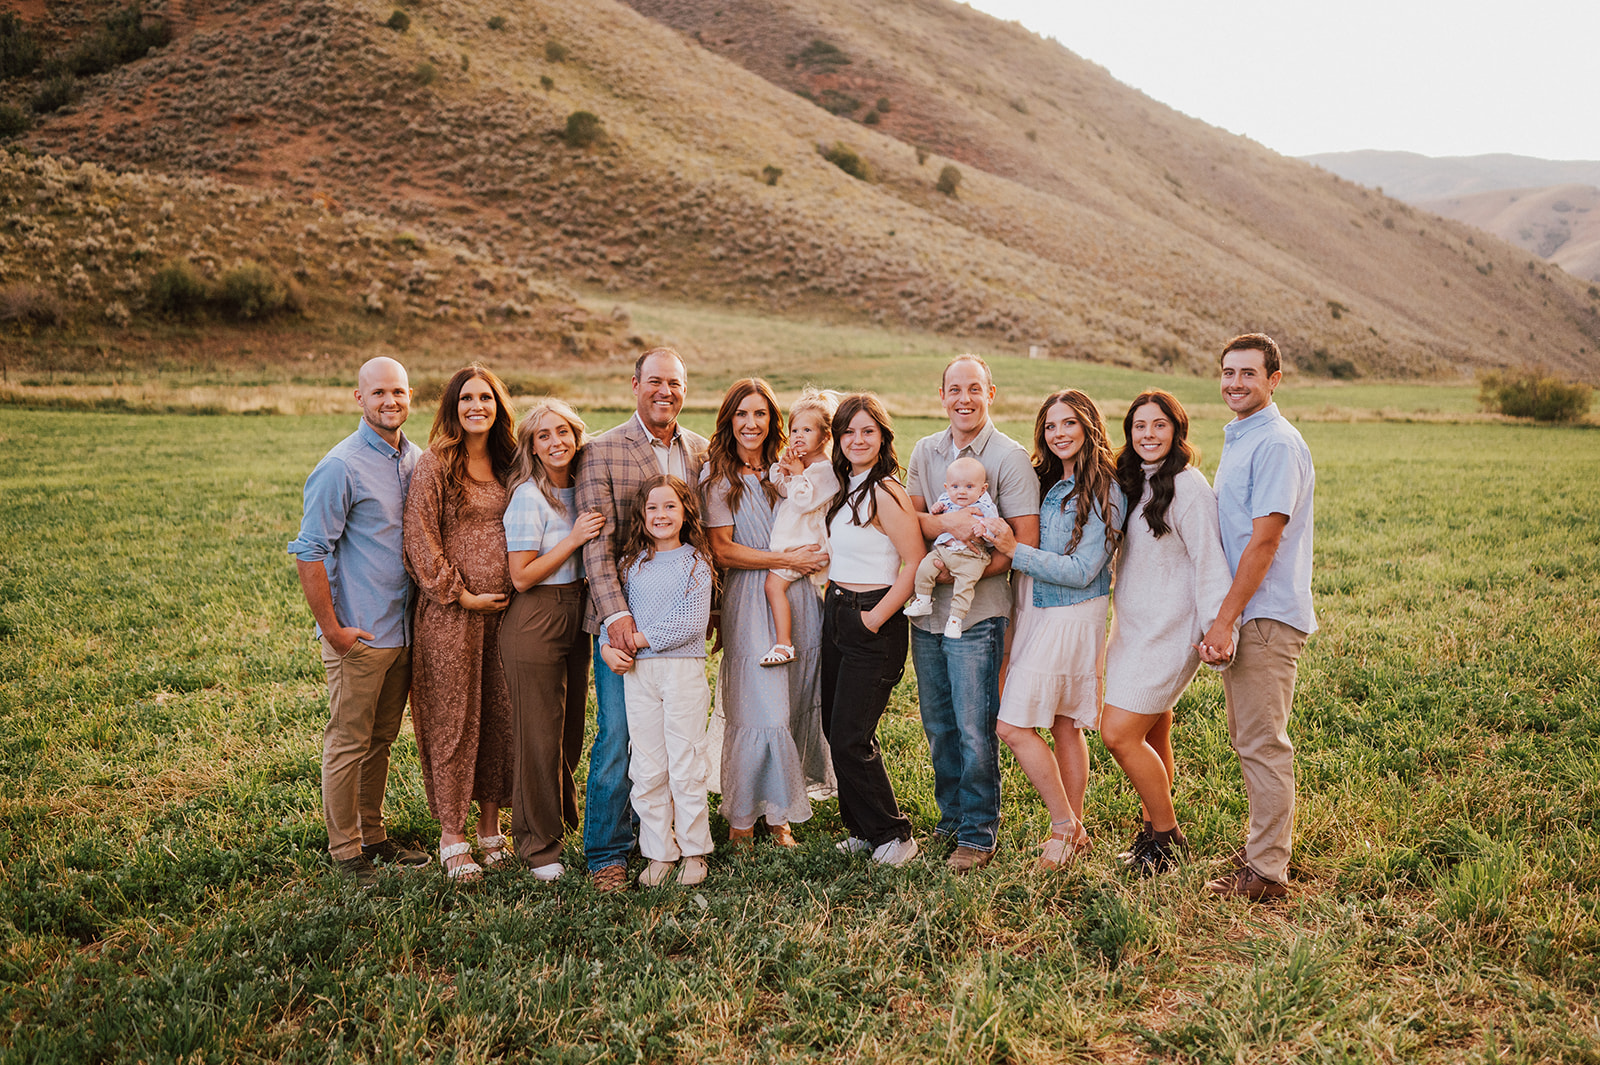 Speaker Mike Schultz with his wife, six children, and two grandchildren standing in a field for a family portrait